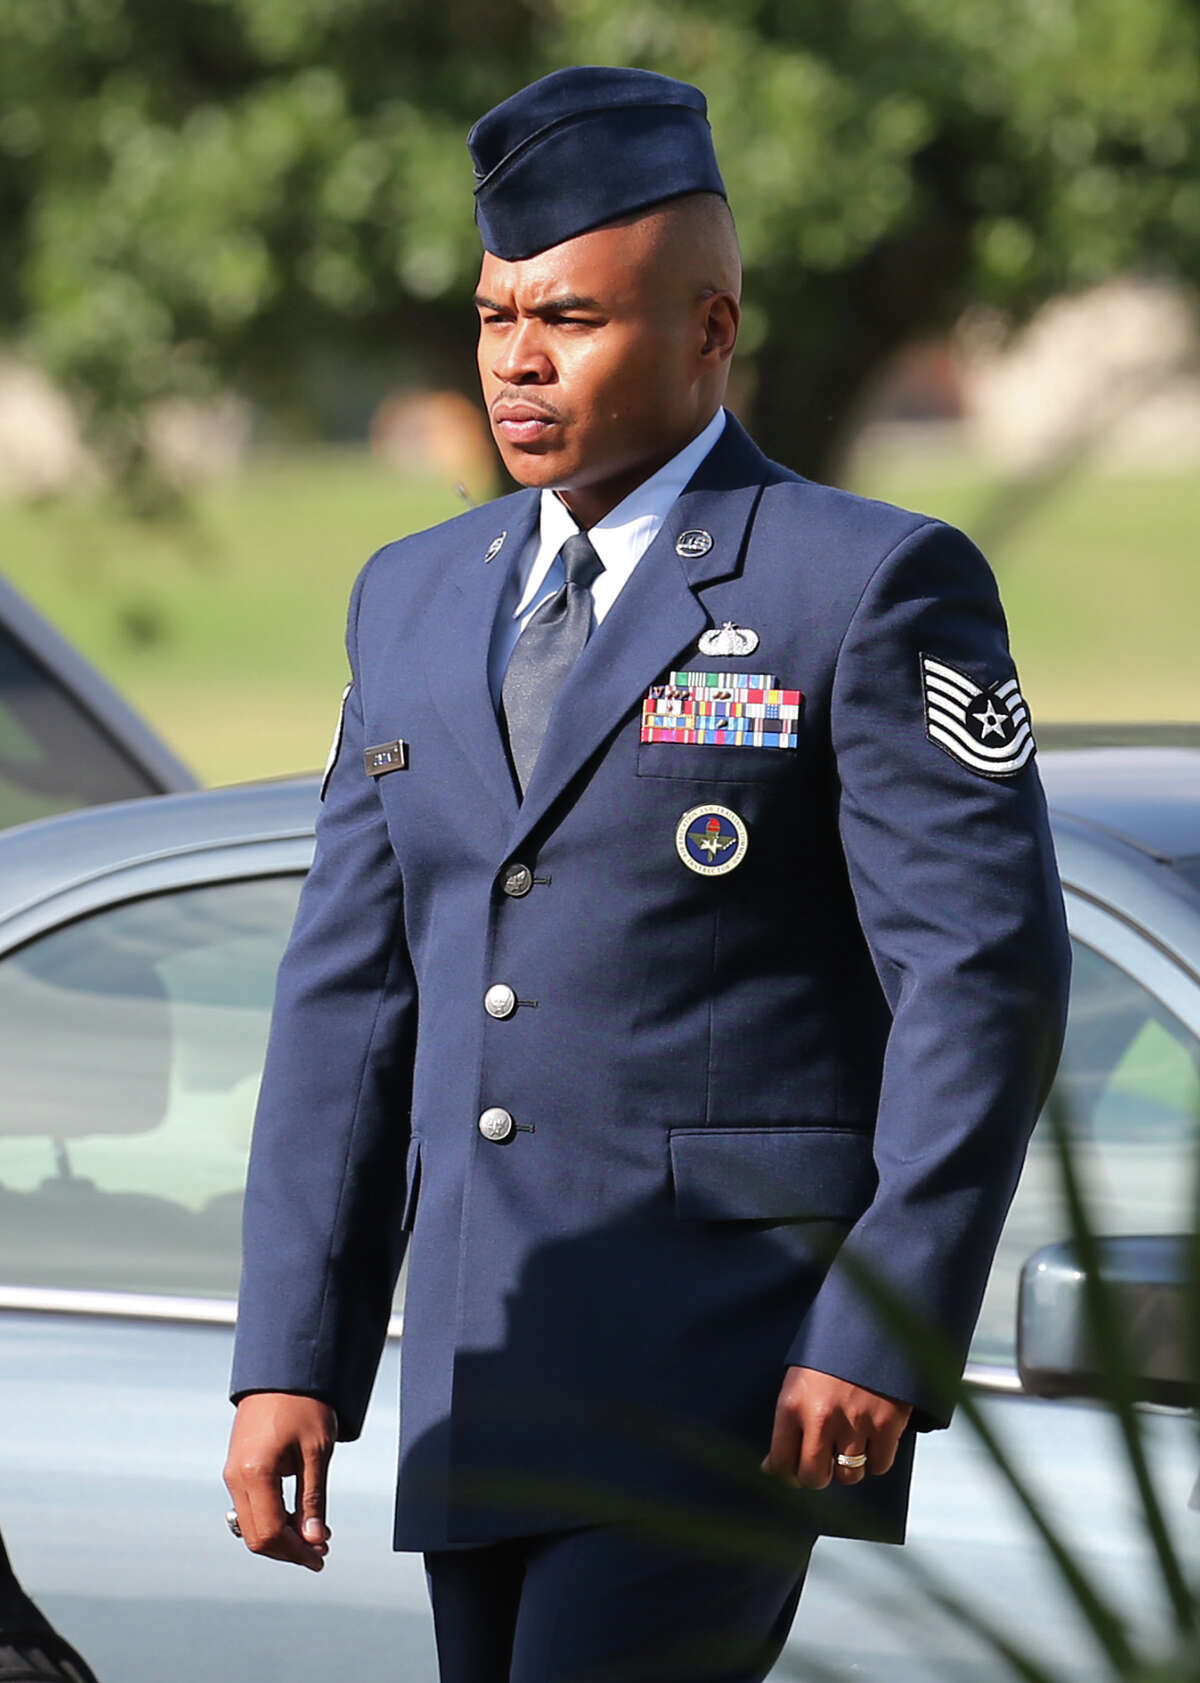 Tech. Sgt. Marc Gayden arrives at Lackland Air Force Base for his trial on sodomy and rape charges, Tuesday, July 23, 2013.